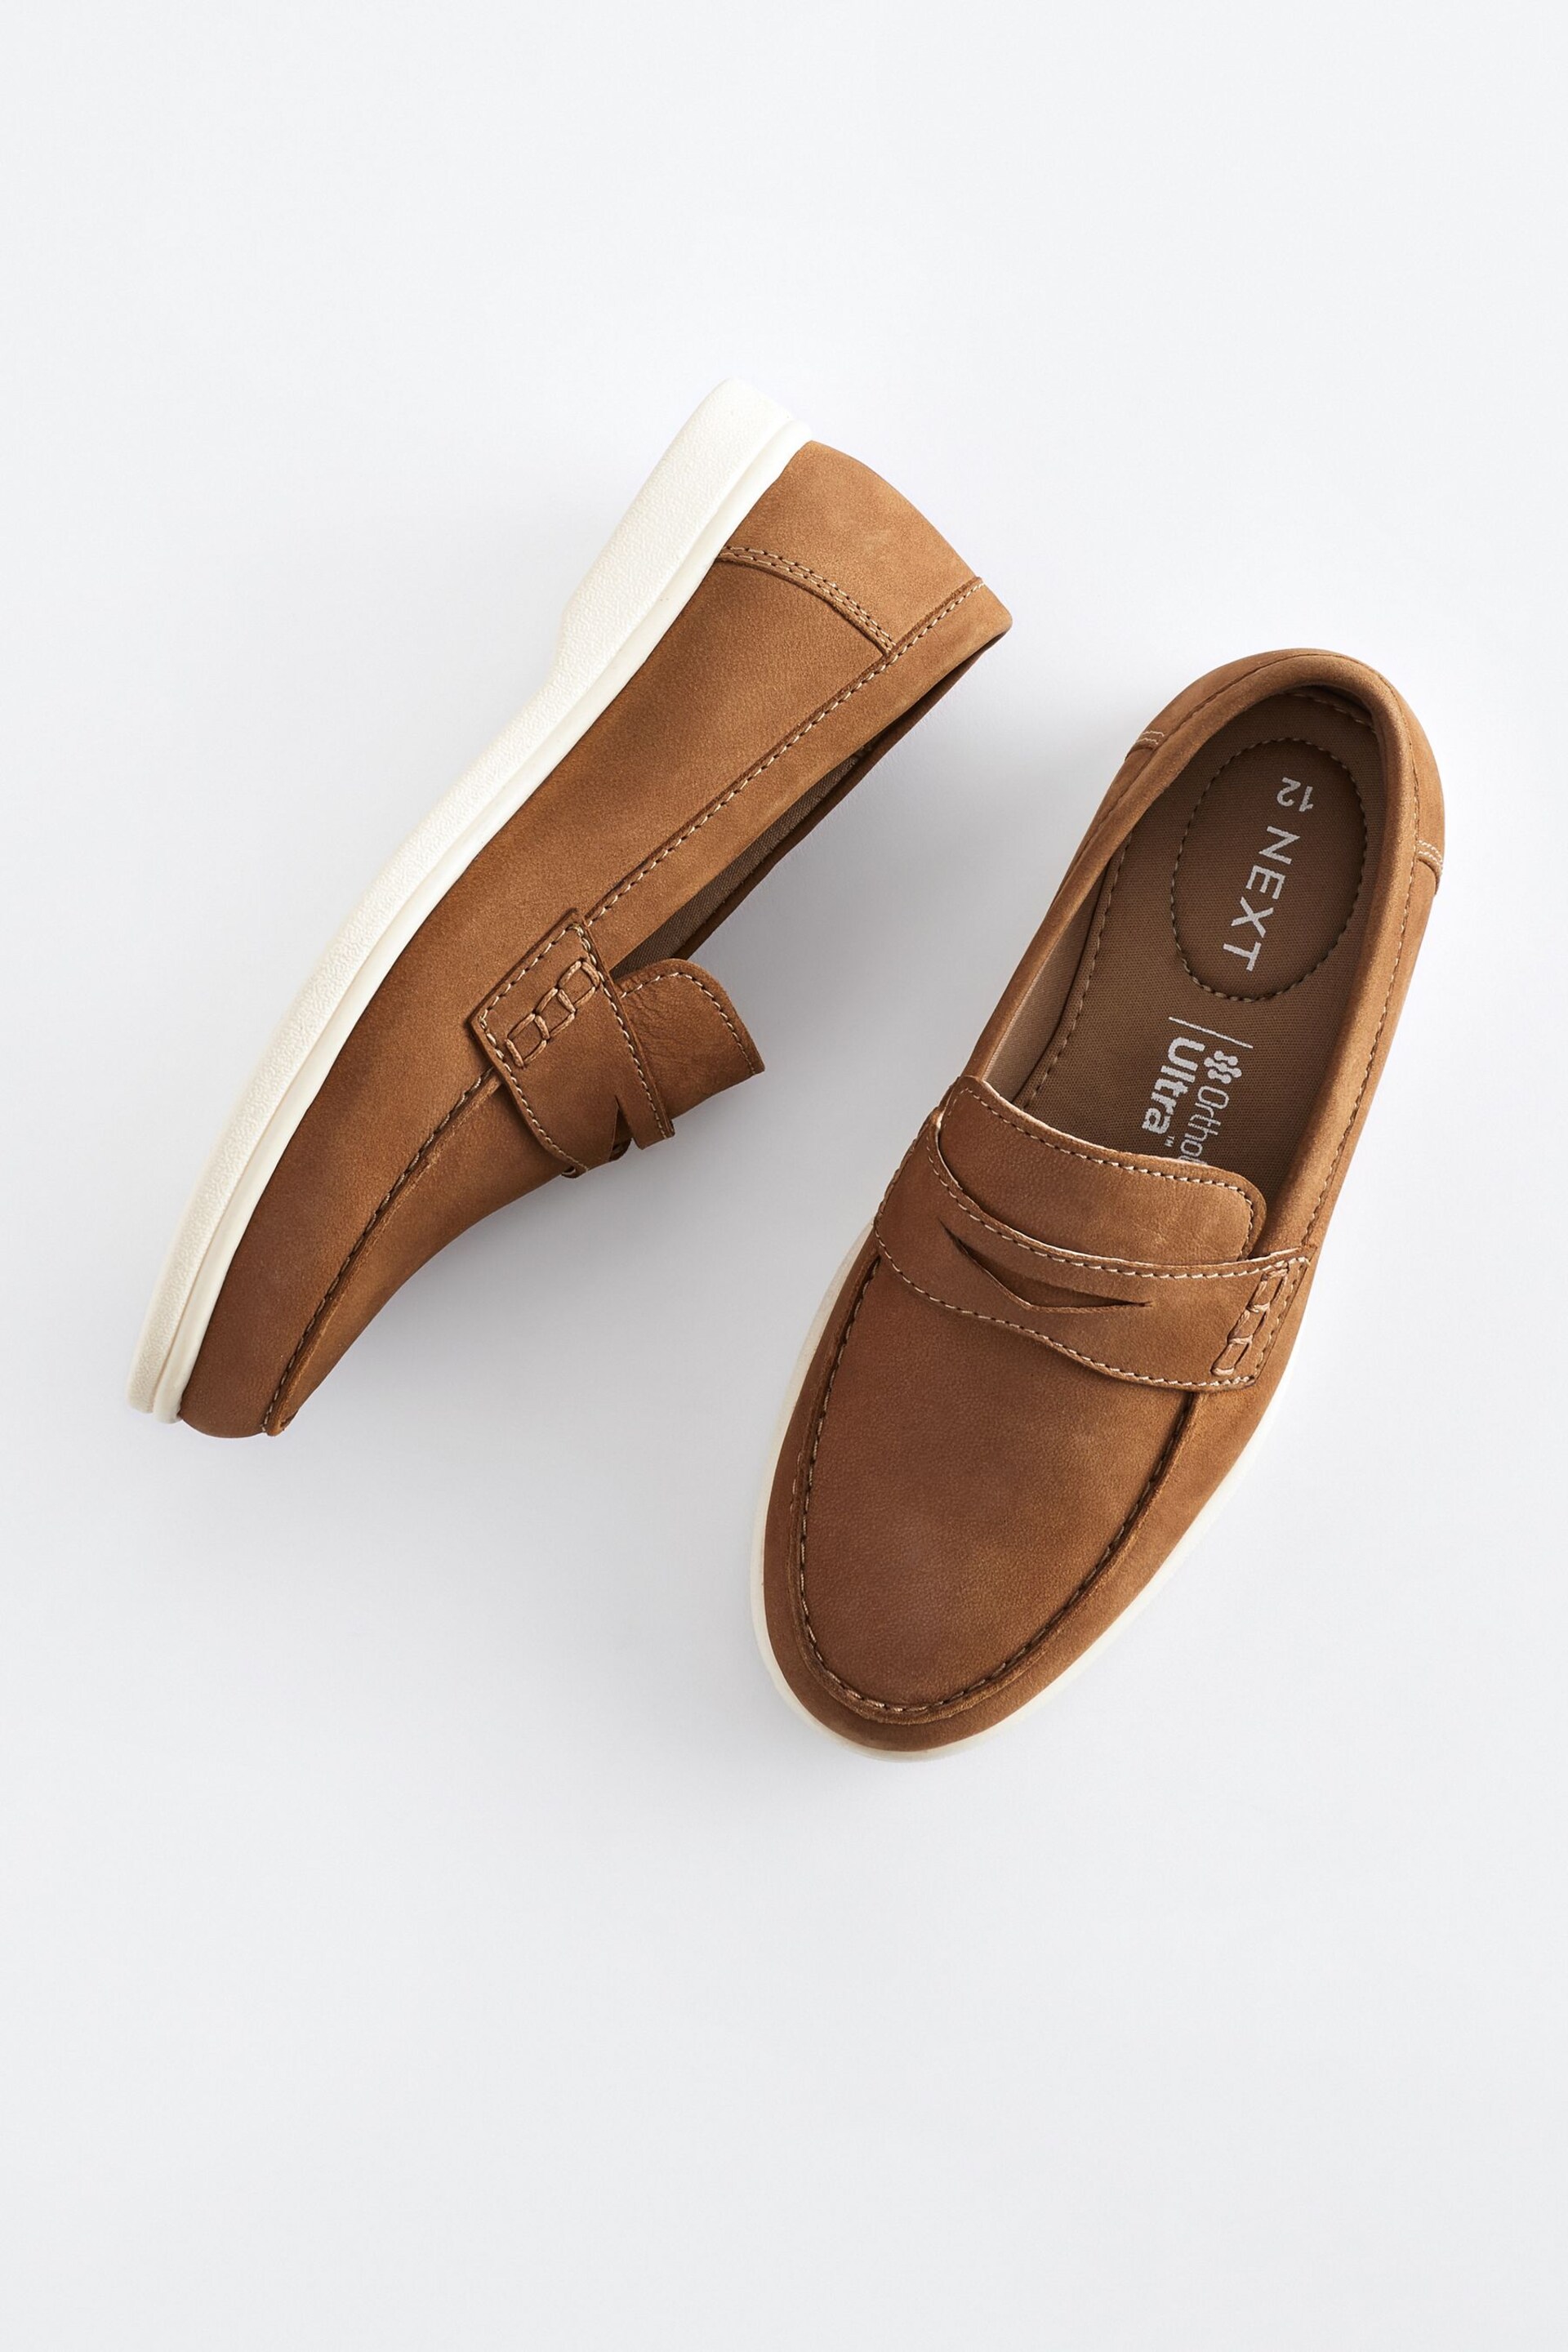 Tan Brown Contrast Sole Leather Penny Loafers - Image 3 of 6